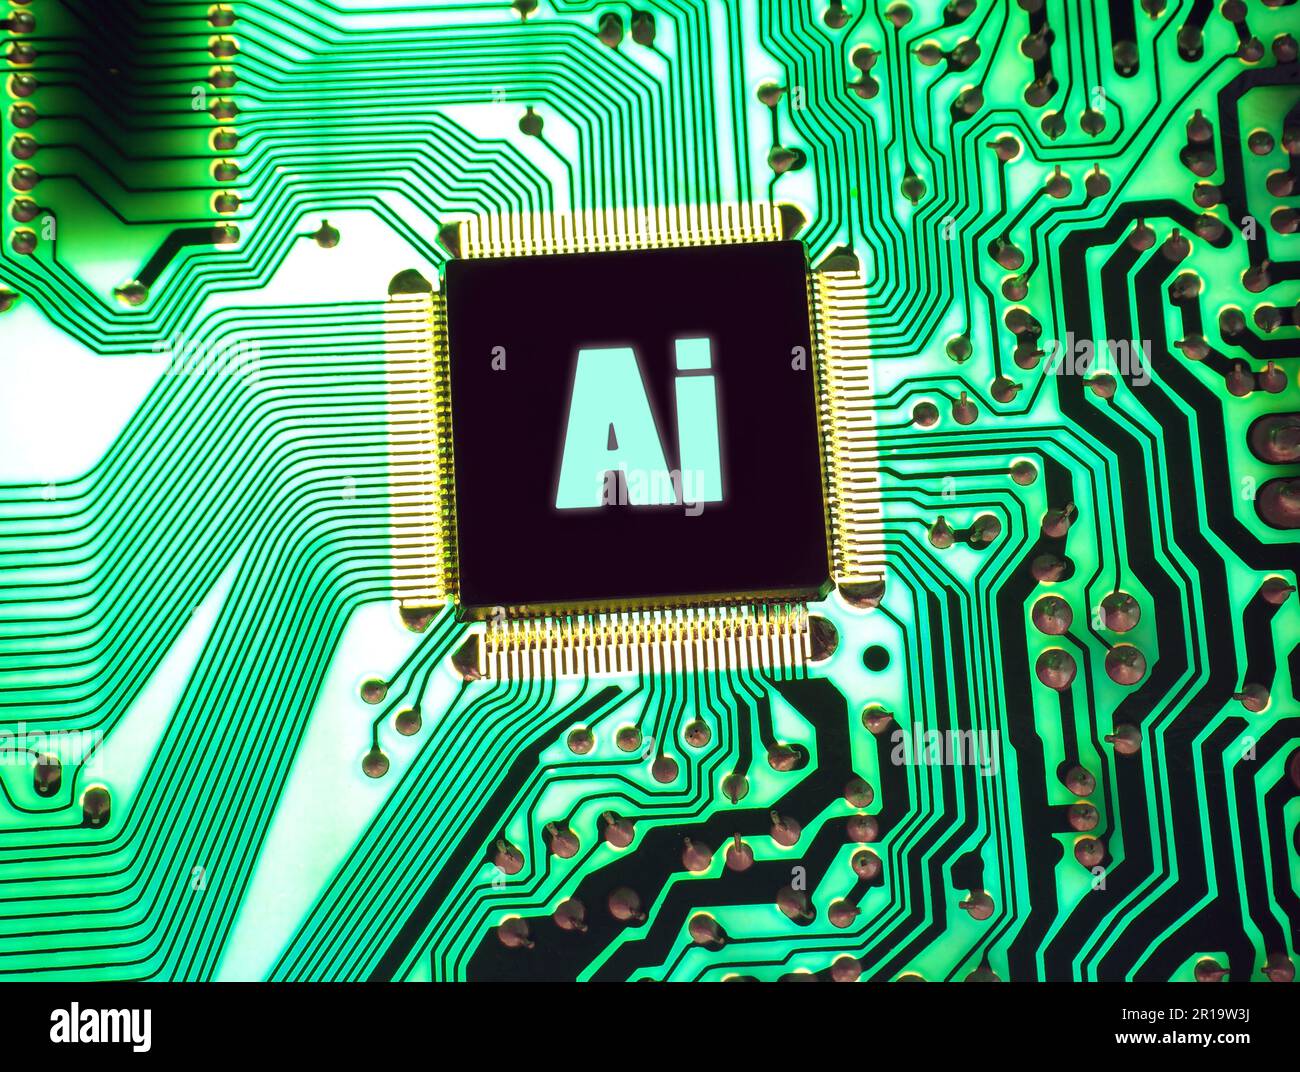 AI technology background. Computer chips Artificial Intelligence concept. Stock Photo